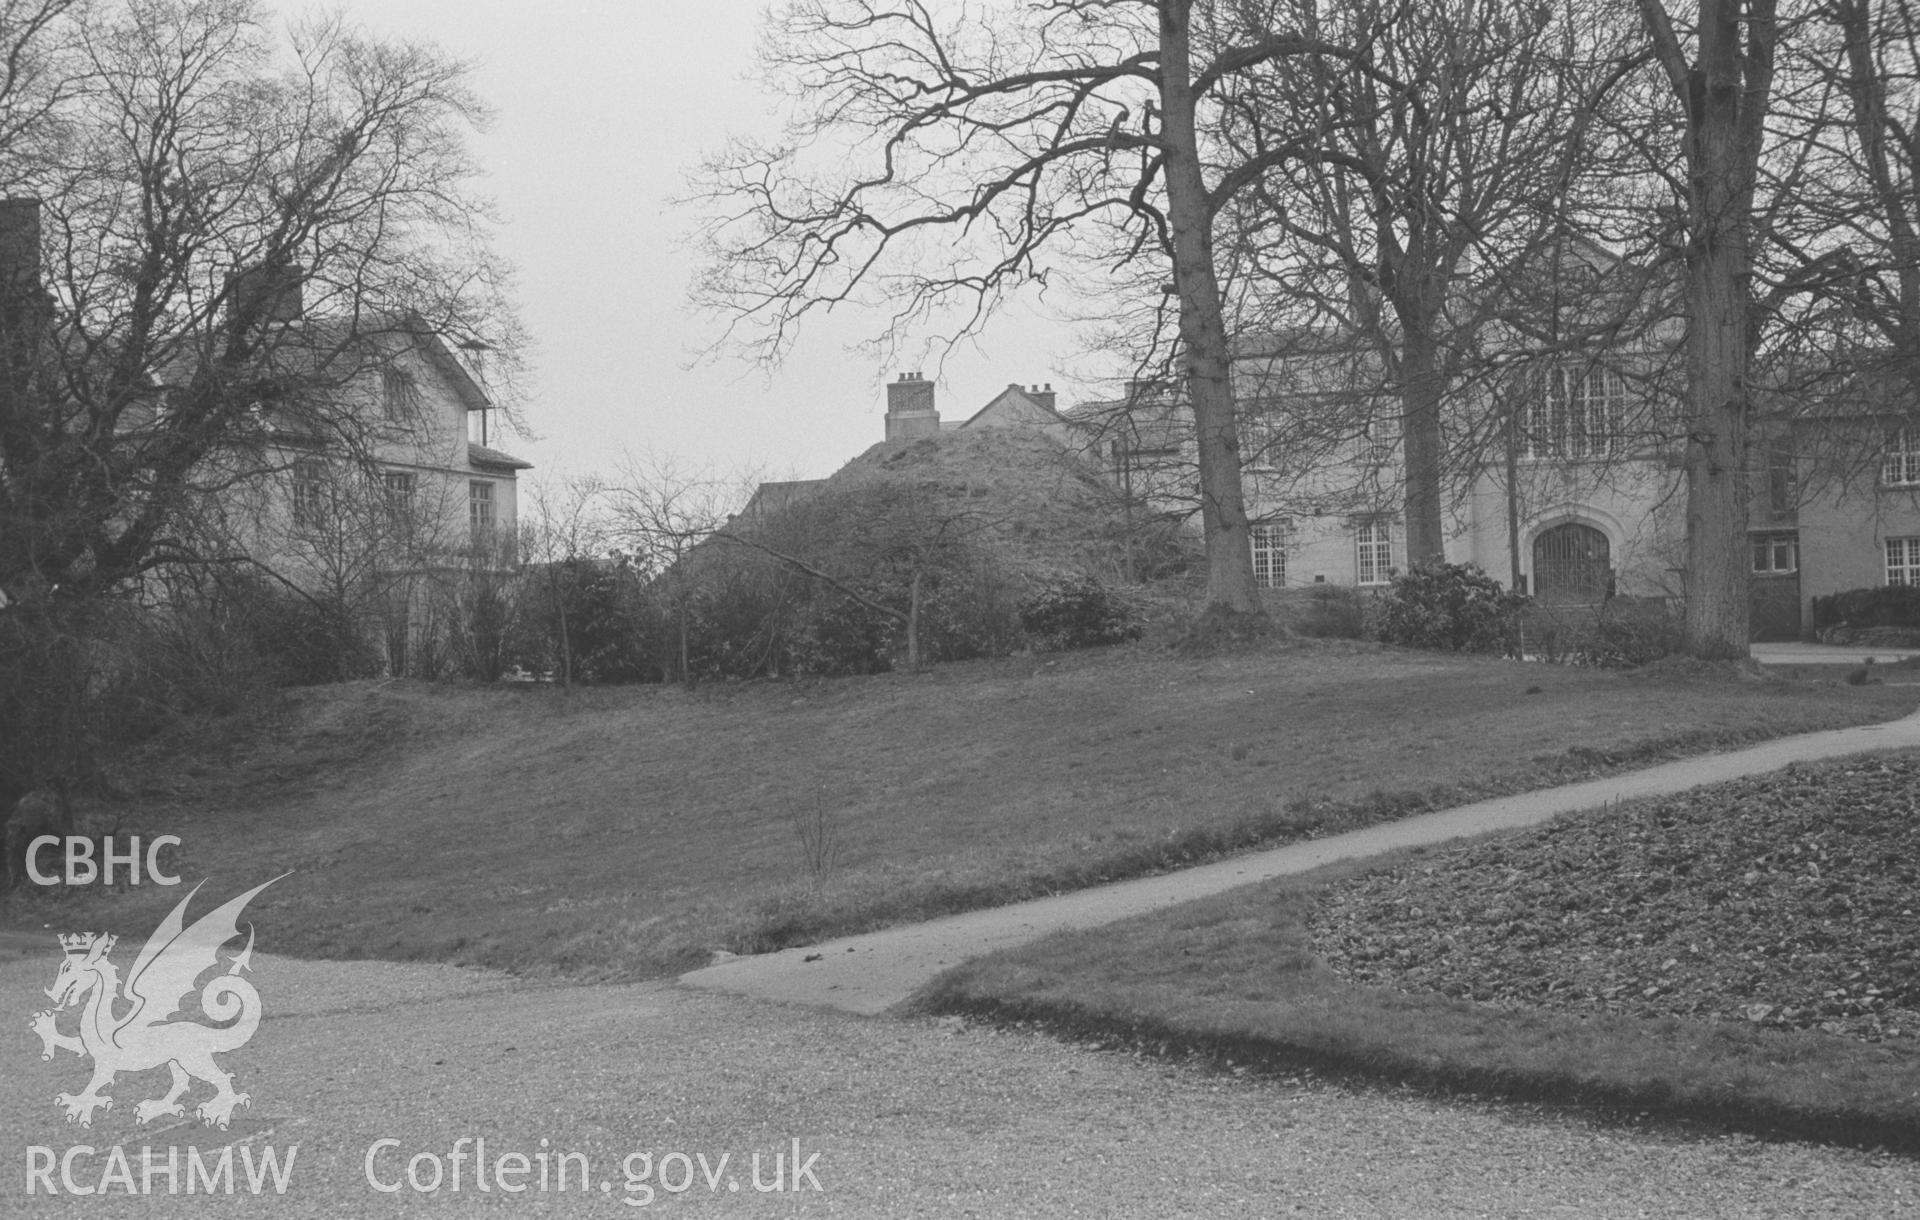 Digital copy of black & white negative showing Stephen's Castle motte with college school on left and main building of St. David's college on right, Lampeter. Photographed in March 1964 by Arthur O. Chater from Grid Ref SN 5791 4831, looking south east.